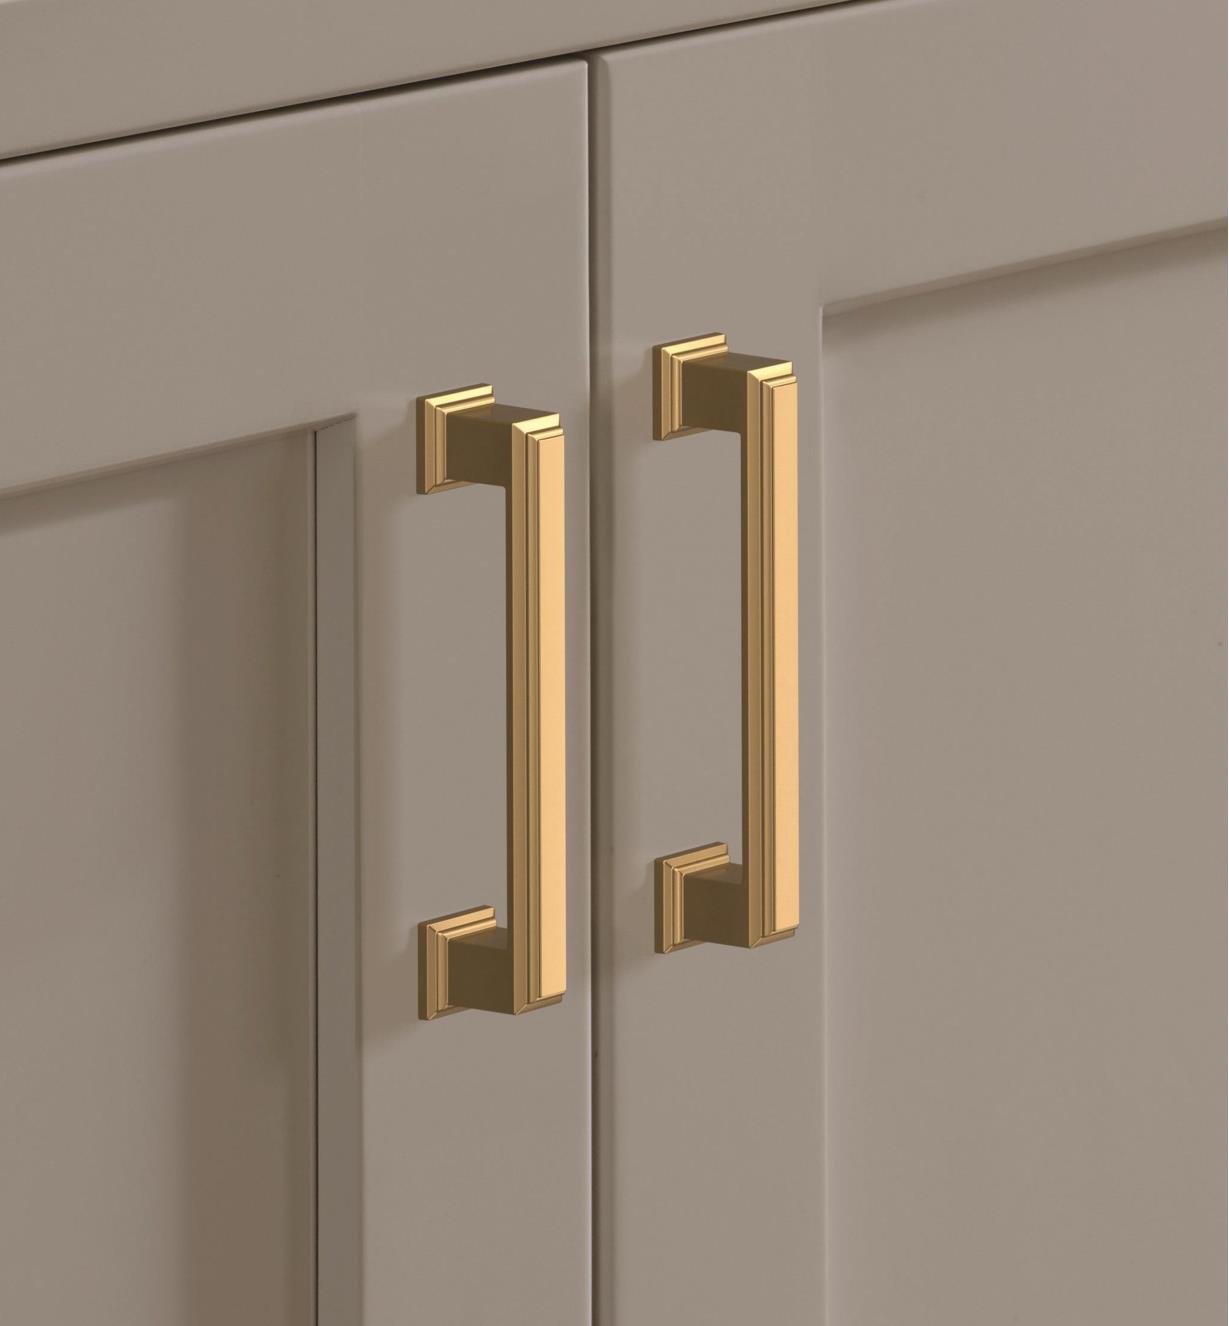 Two champagne bronze Appoint handles connected vertically to two cupboard doors